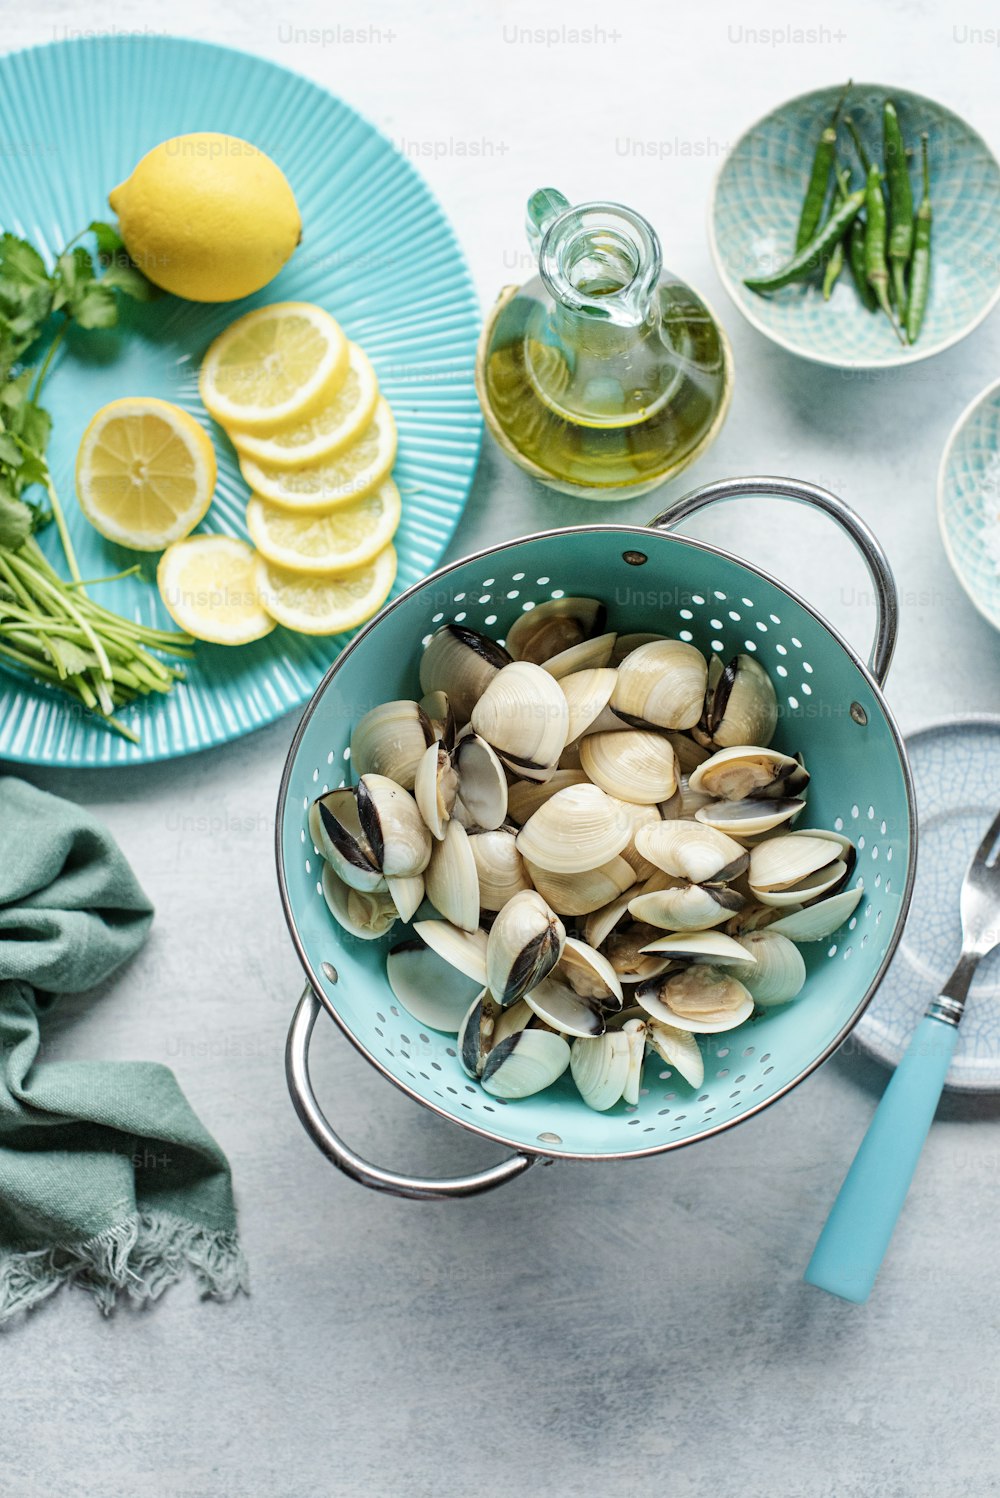 a blue colander filled with clams and lemon slices